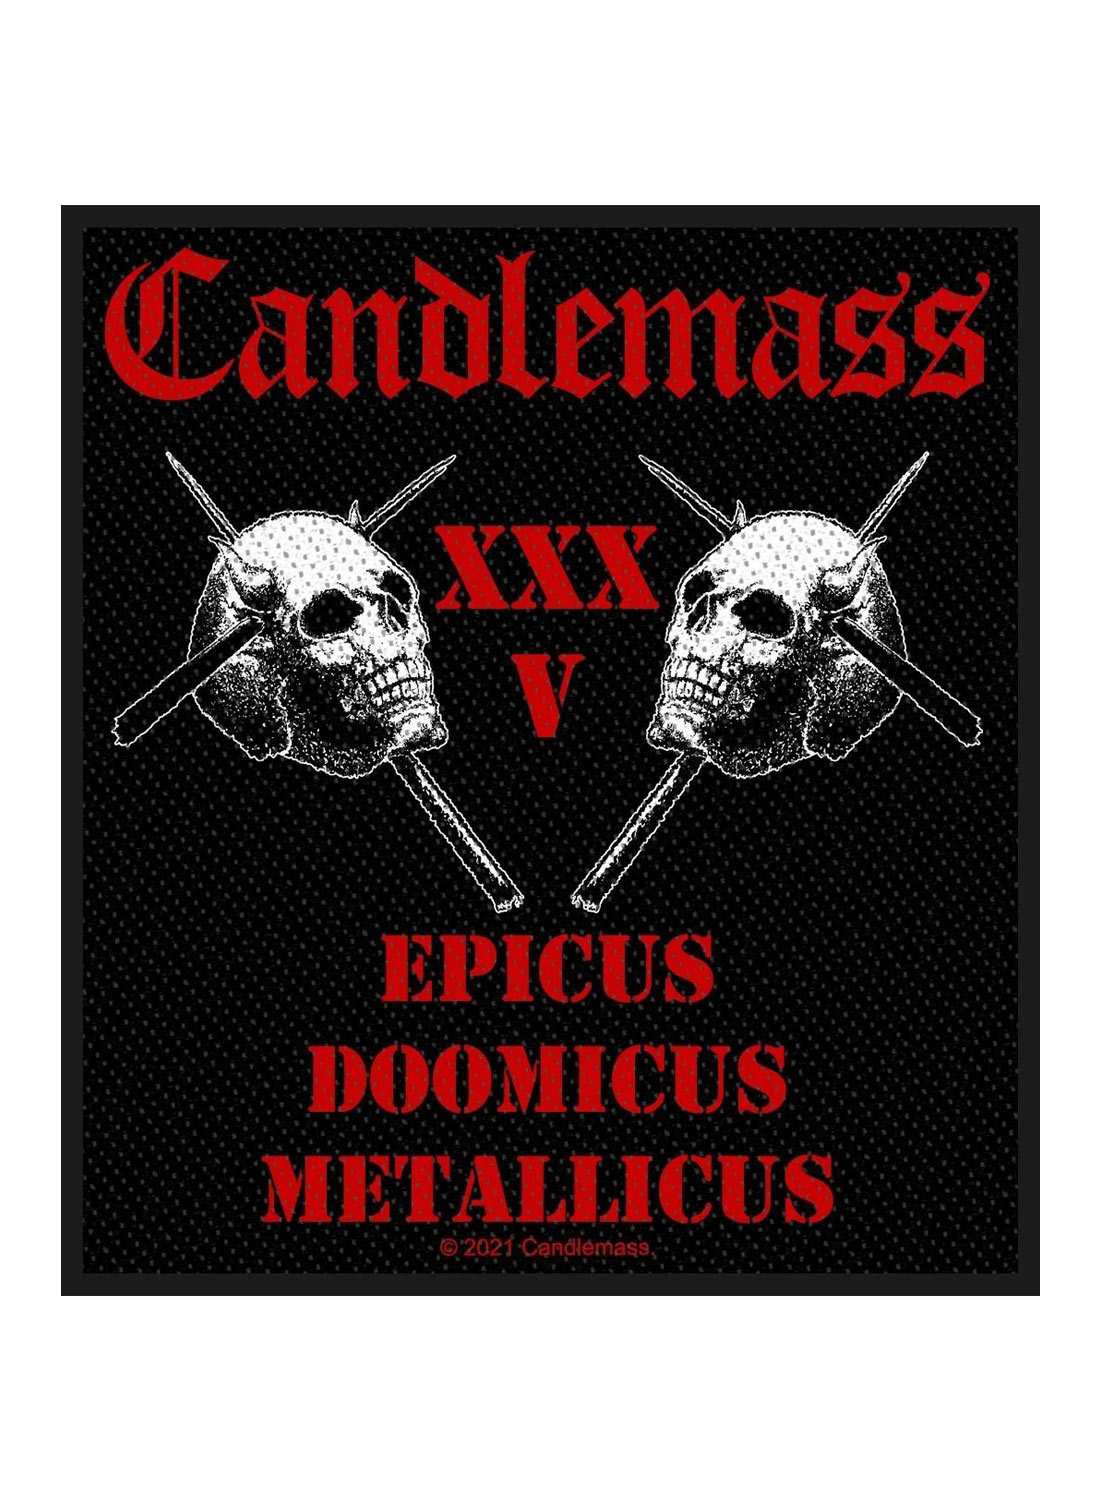 Candlemass Epicus 35th Anniversary